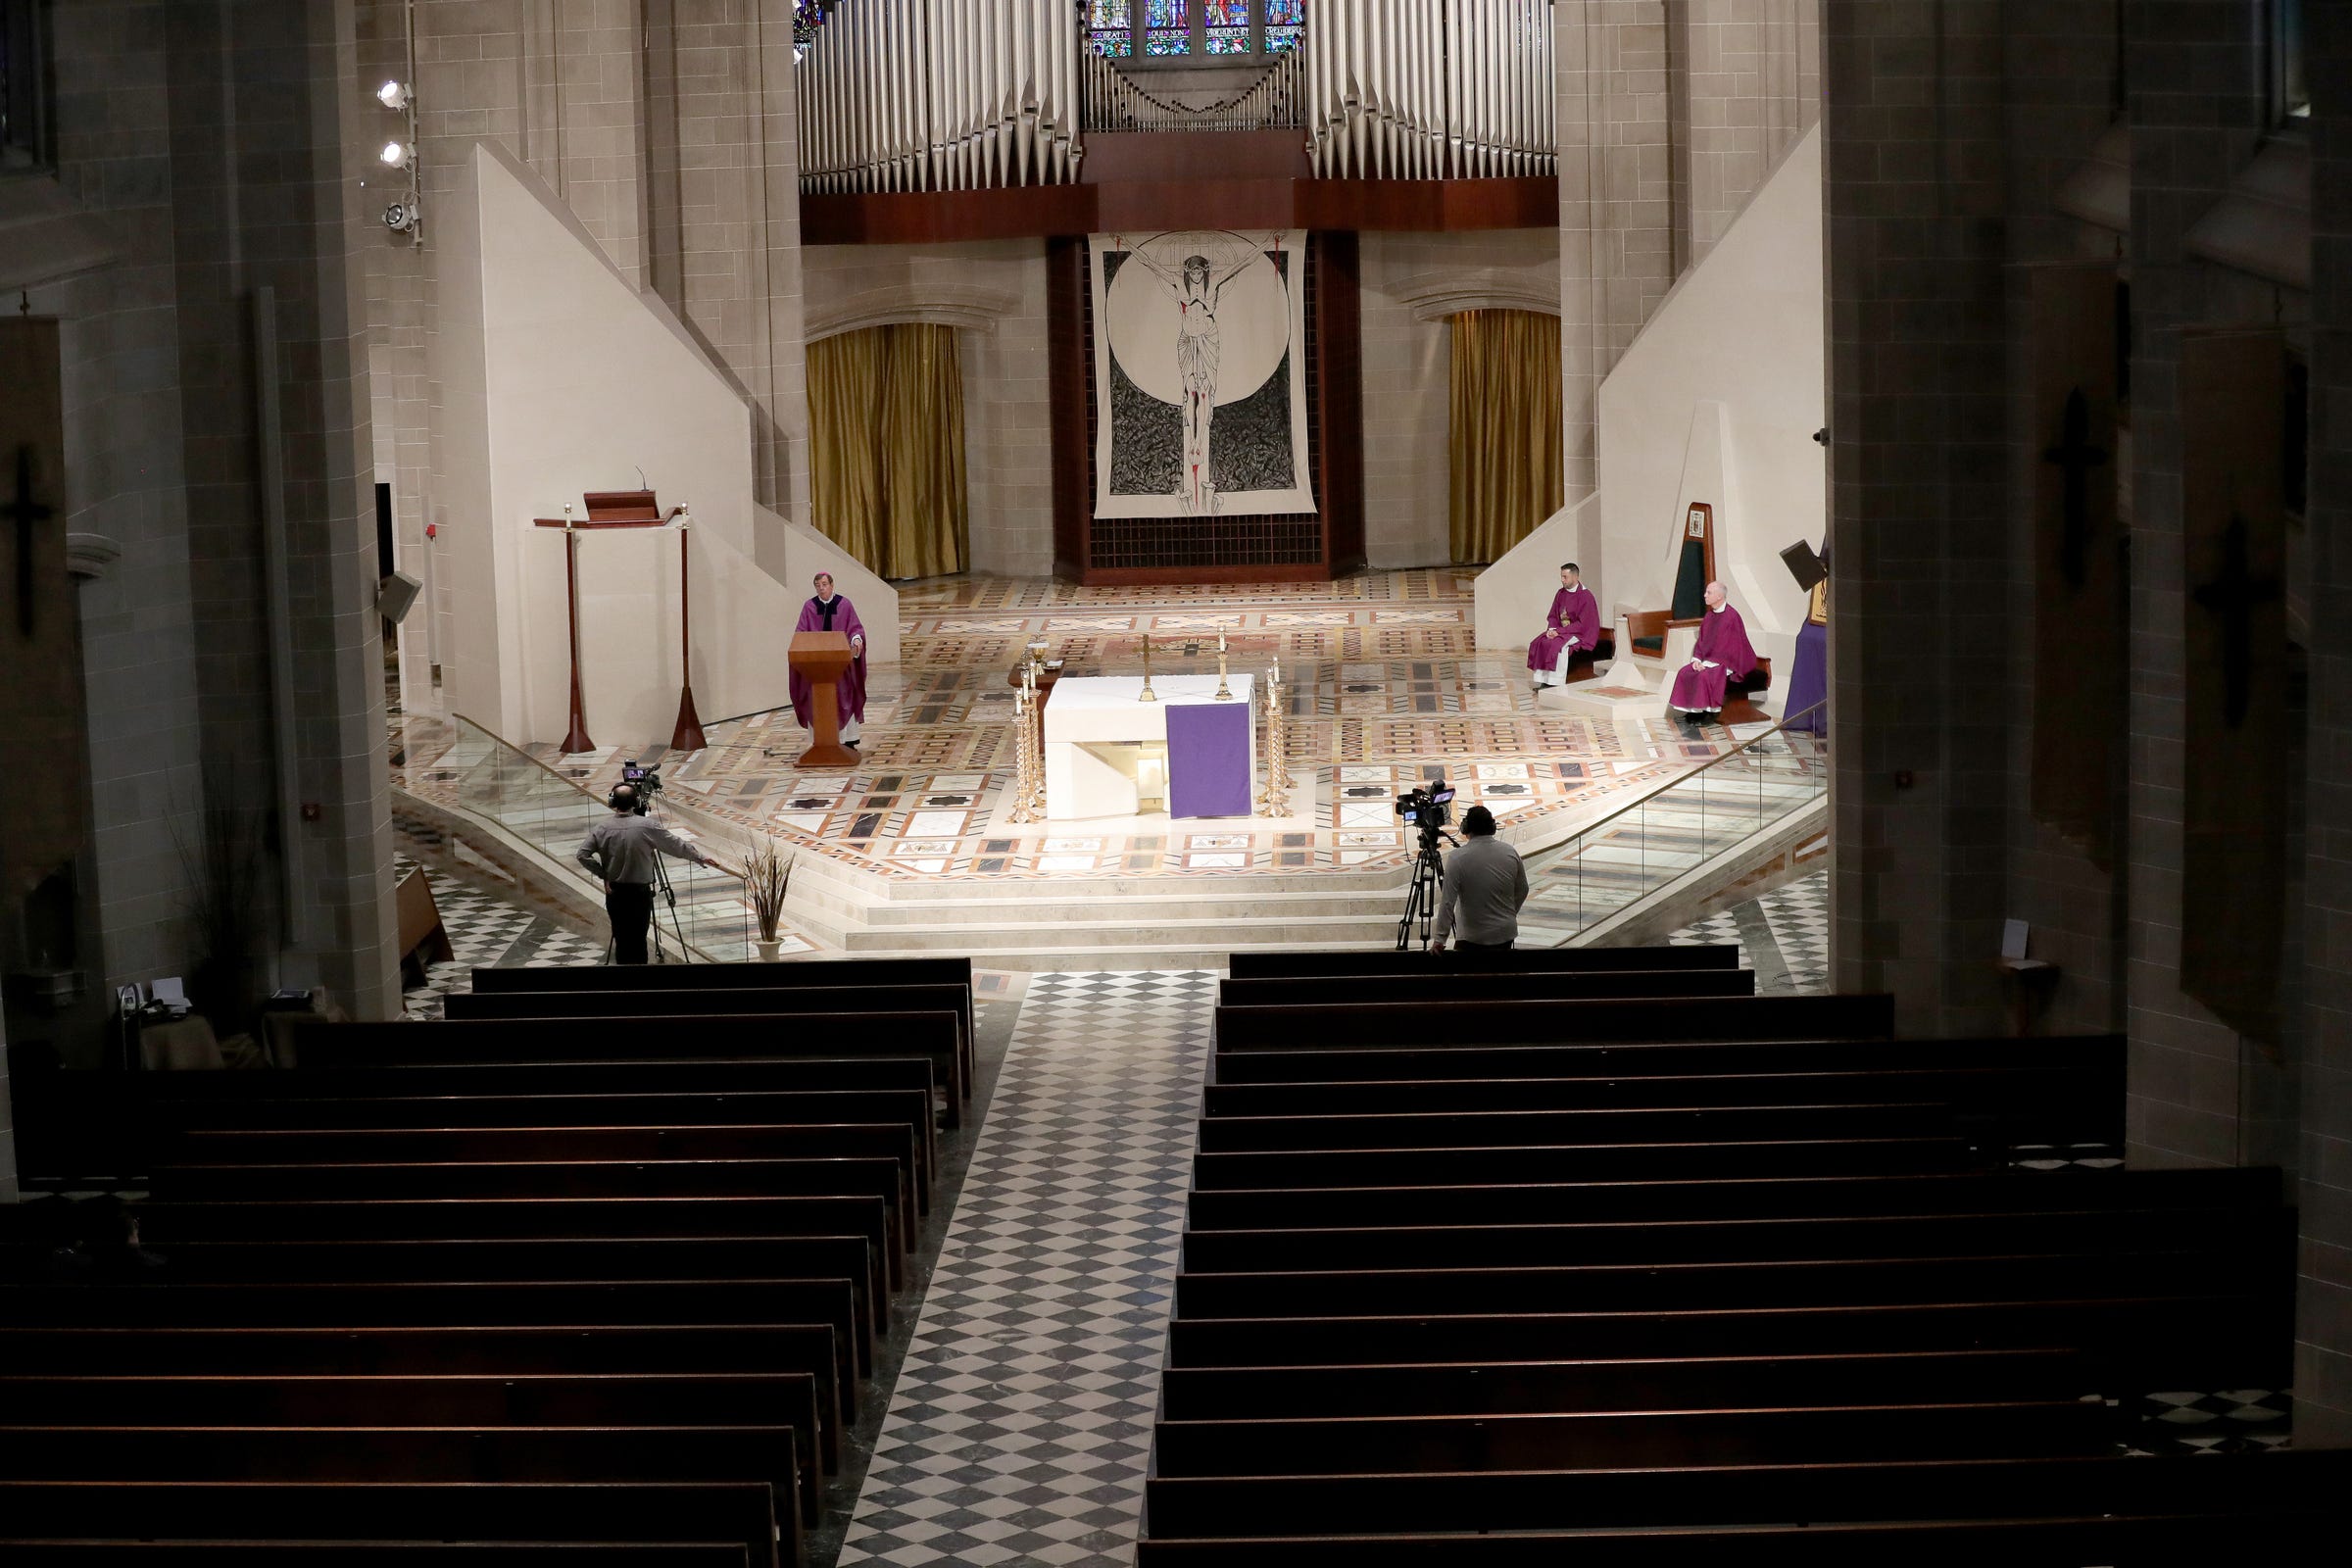 Due to the coronavirus pandemic, Archbishop Vigneron's Sunday mass from the Cathedral of the Most Blessed Sacrament was live-streamed to parishioners on Sunday, March 15, 2020.